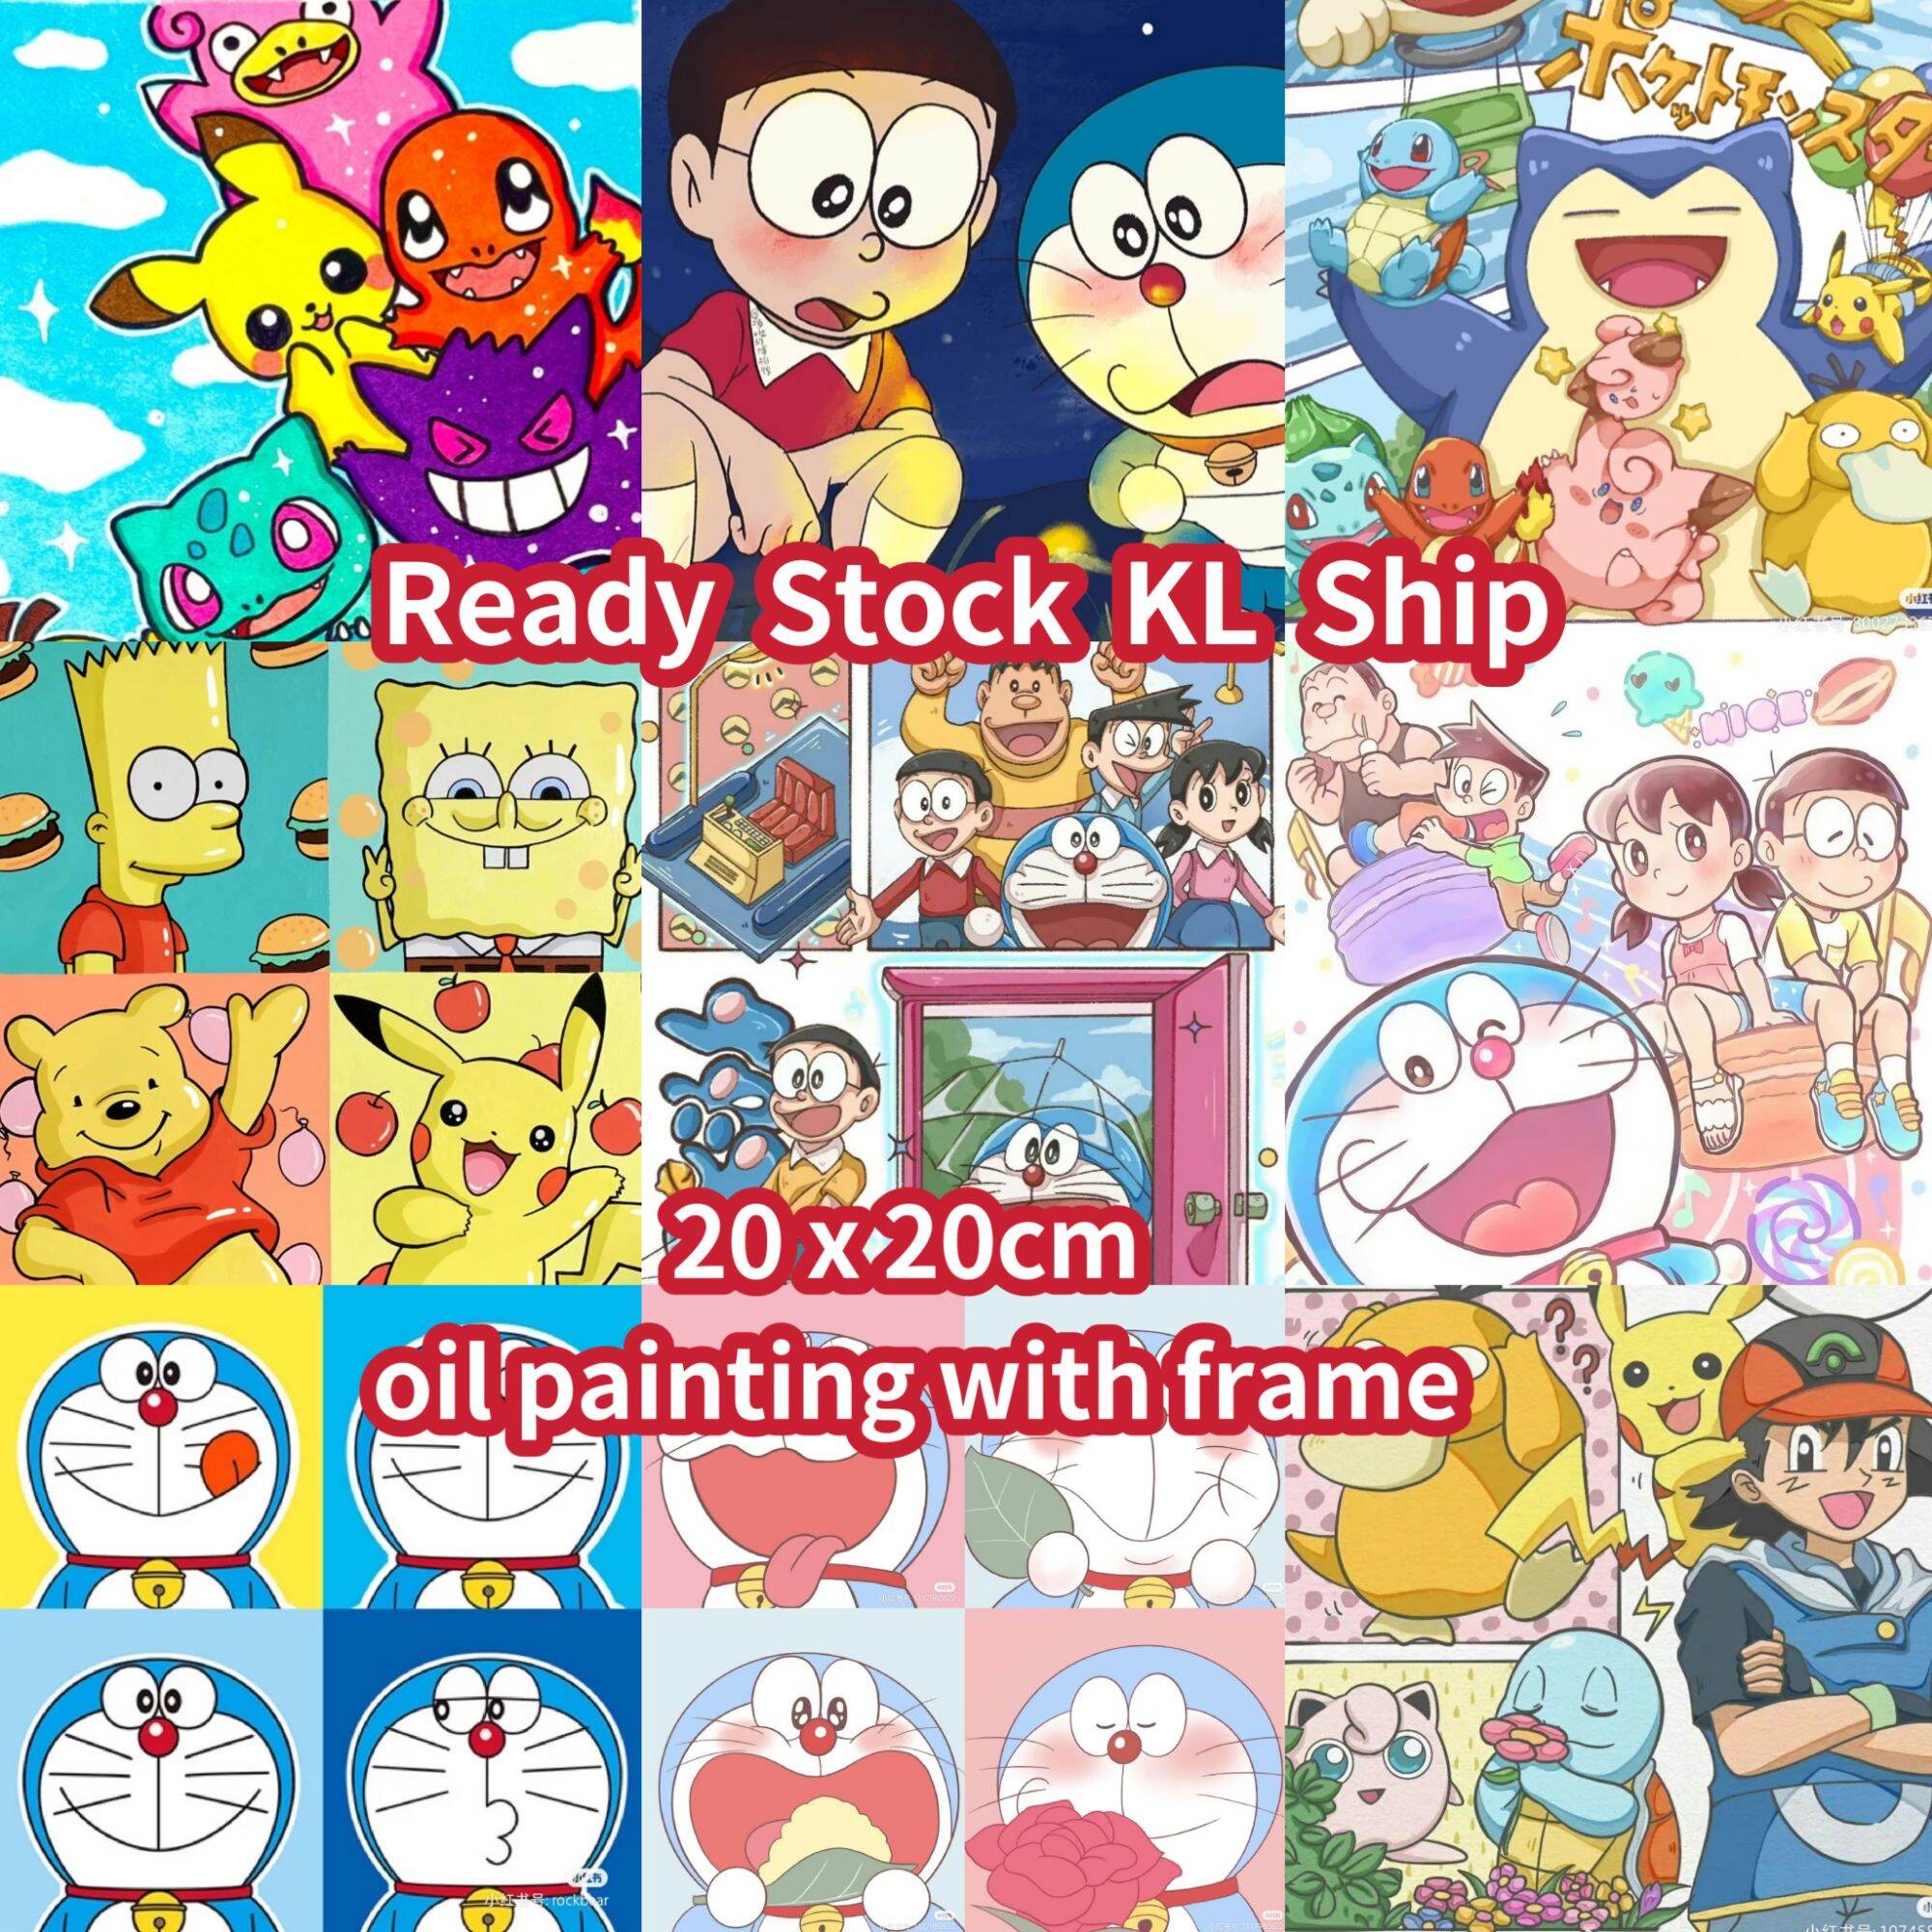 Doraemon and Pikachu Family 20*20cm Diy Digital Oil Painting by Numbers  with Frame | Lazada